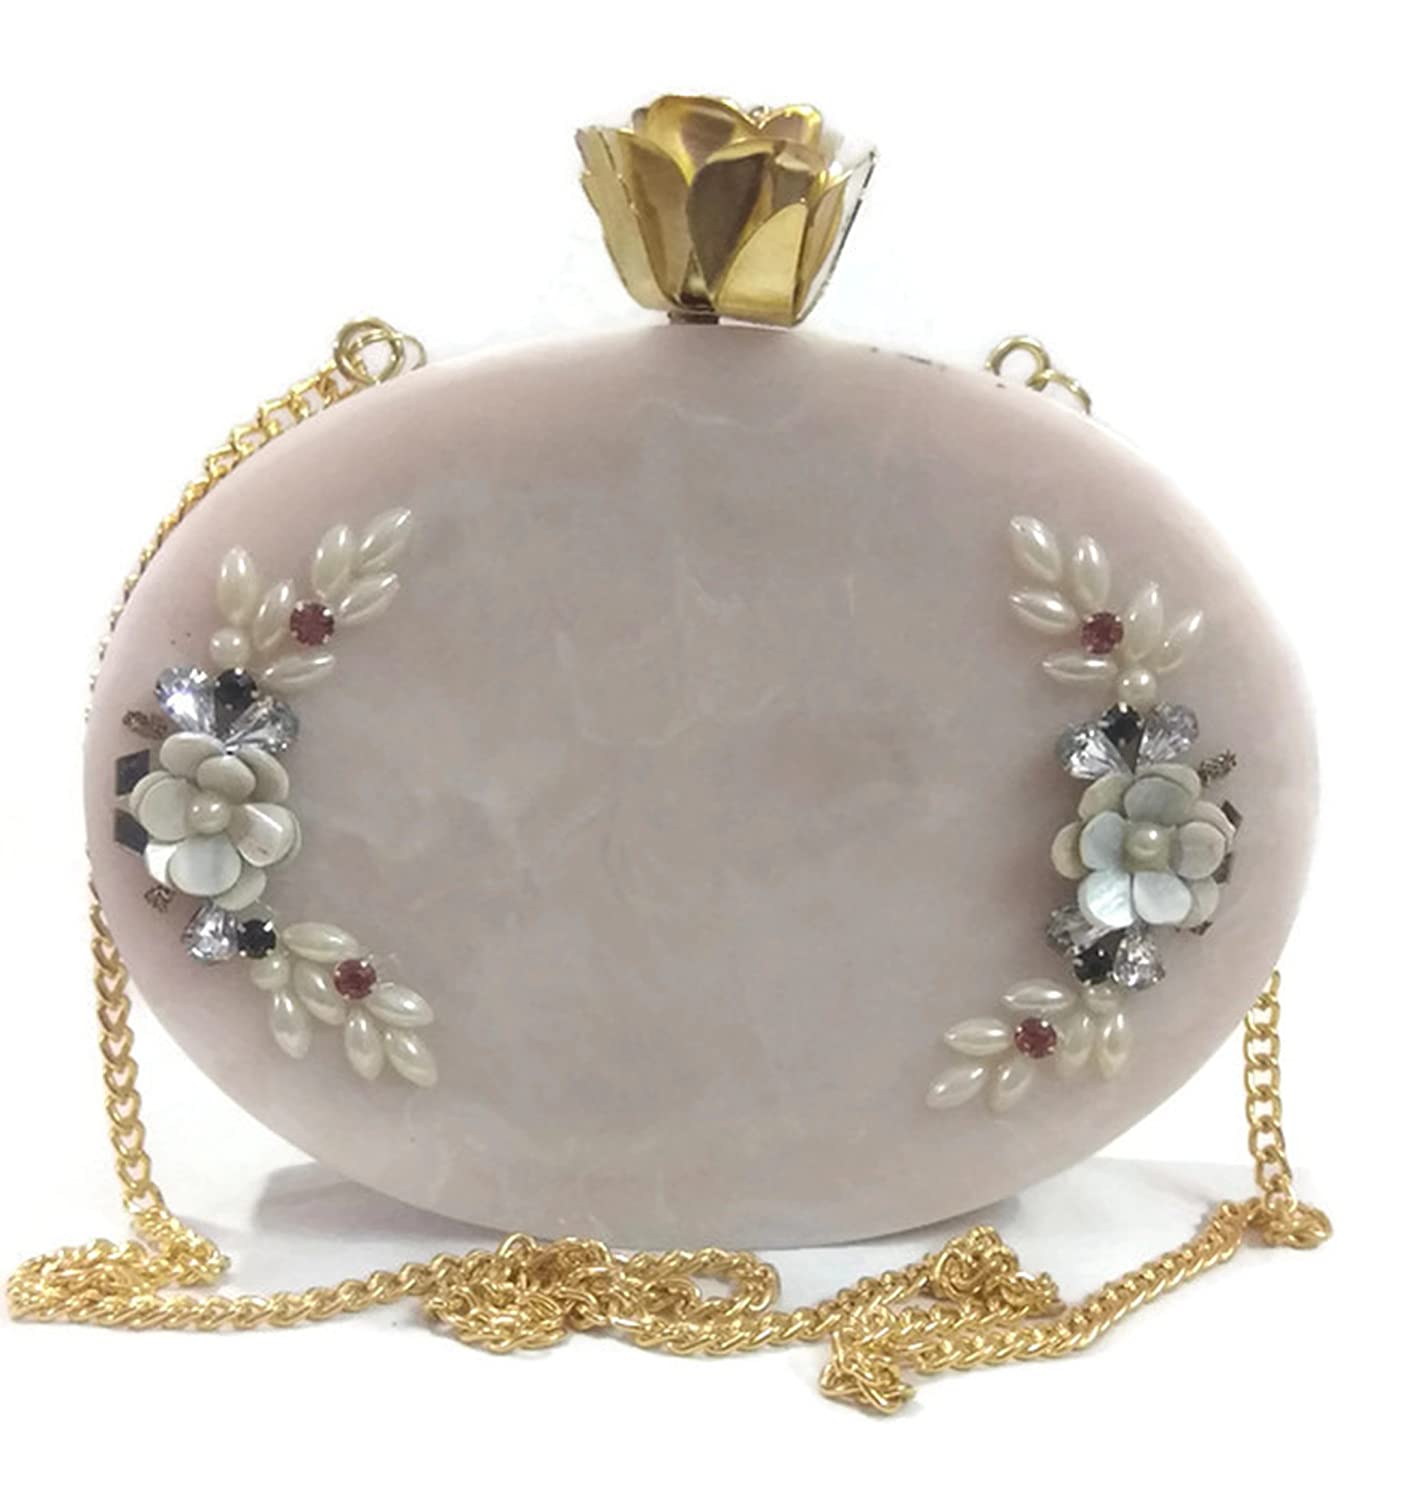 17 Reasons for Why You Should Buy Resin Clutches